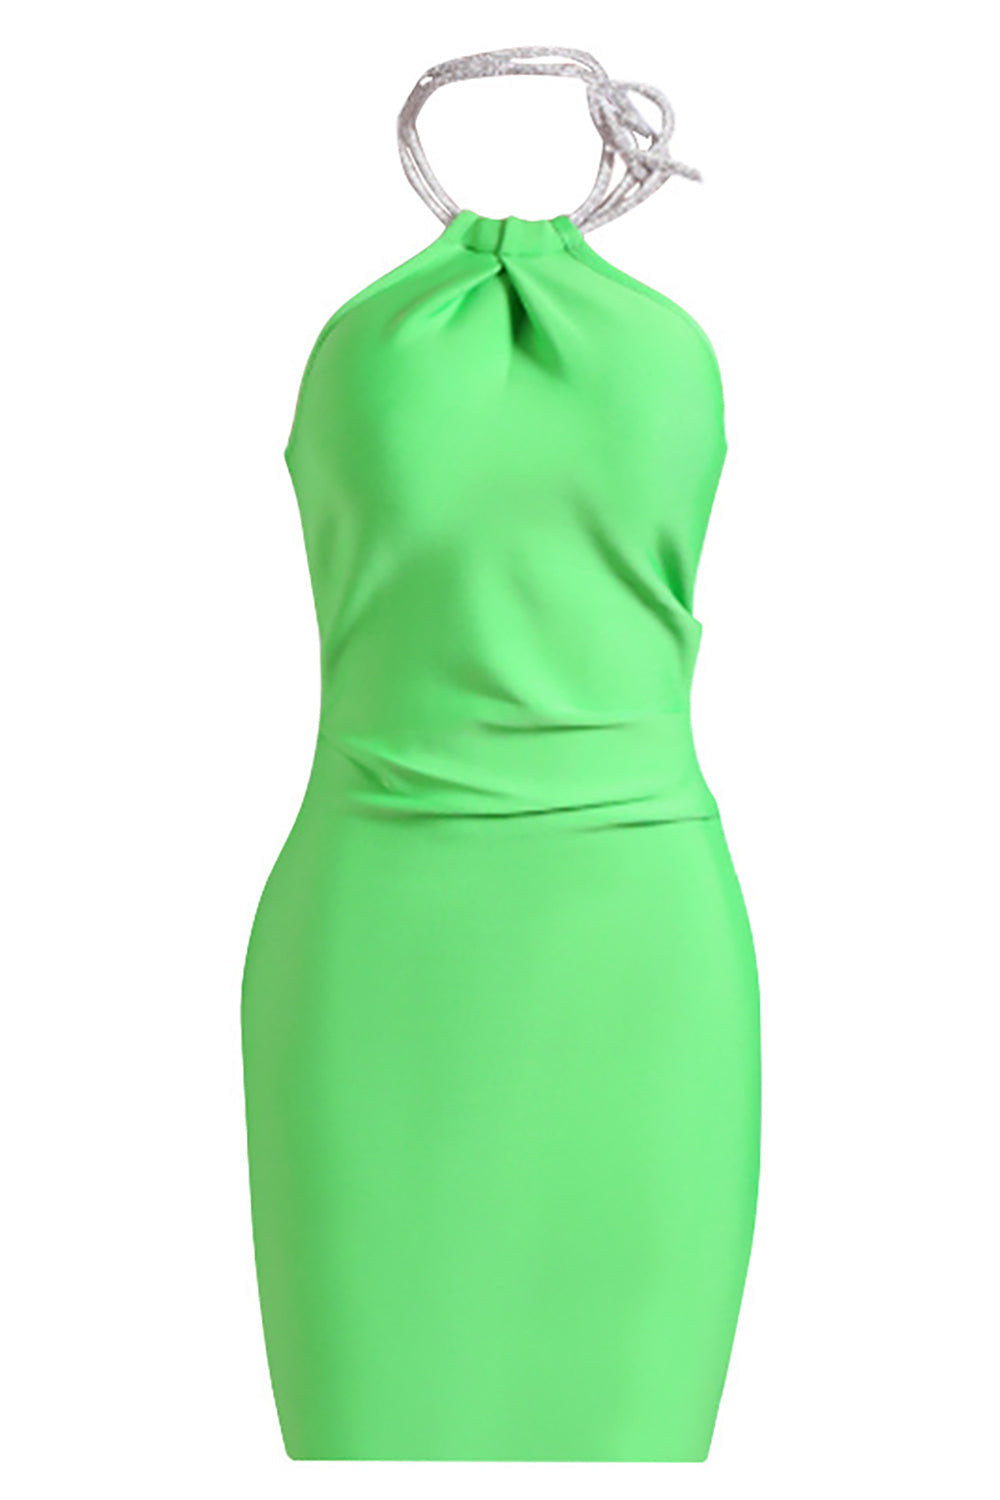 Green Halter Backless Bodycon Cocktail Dress